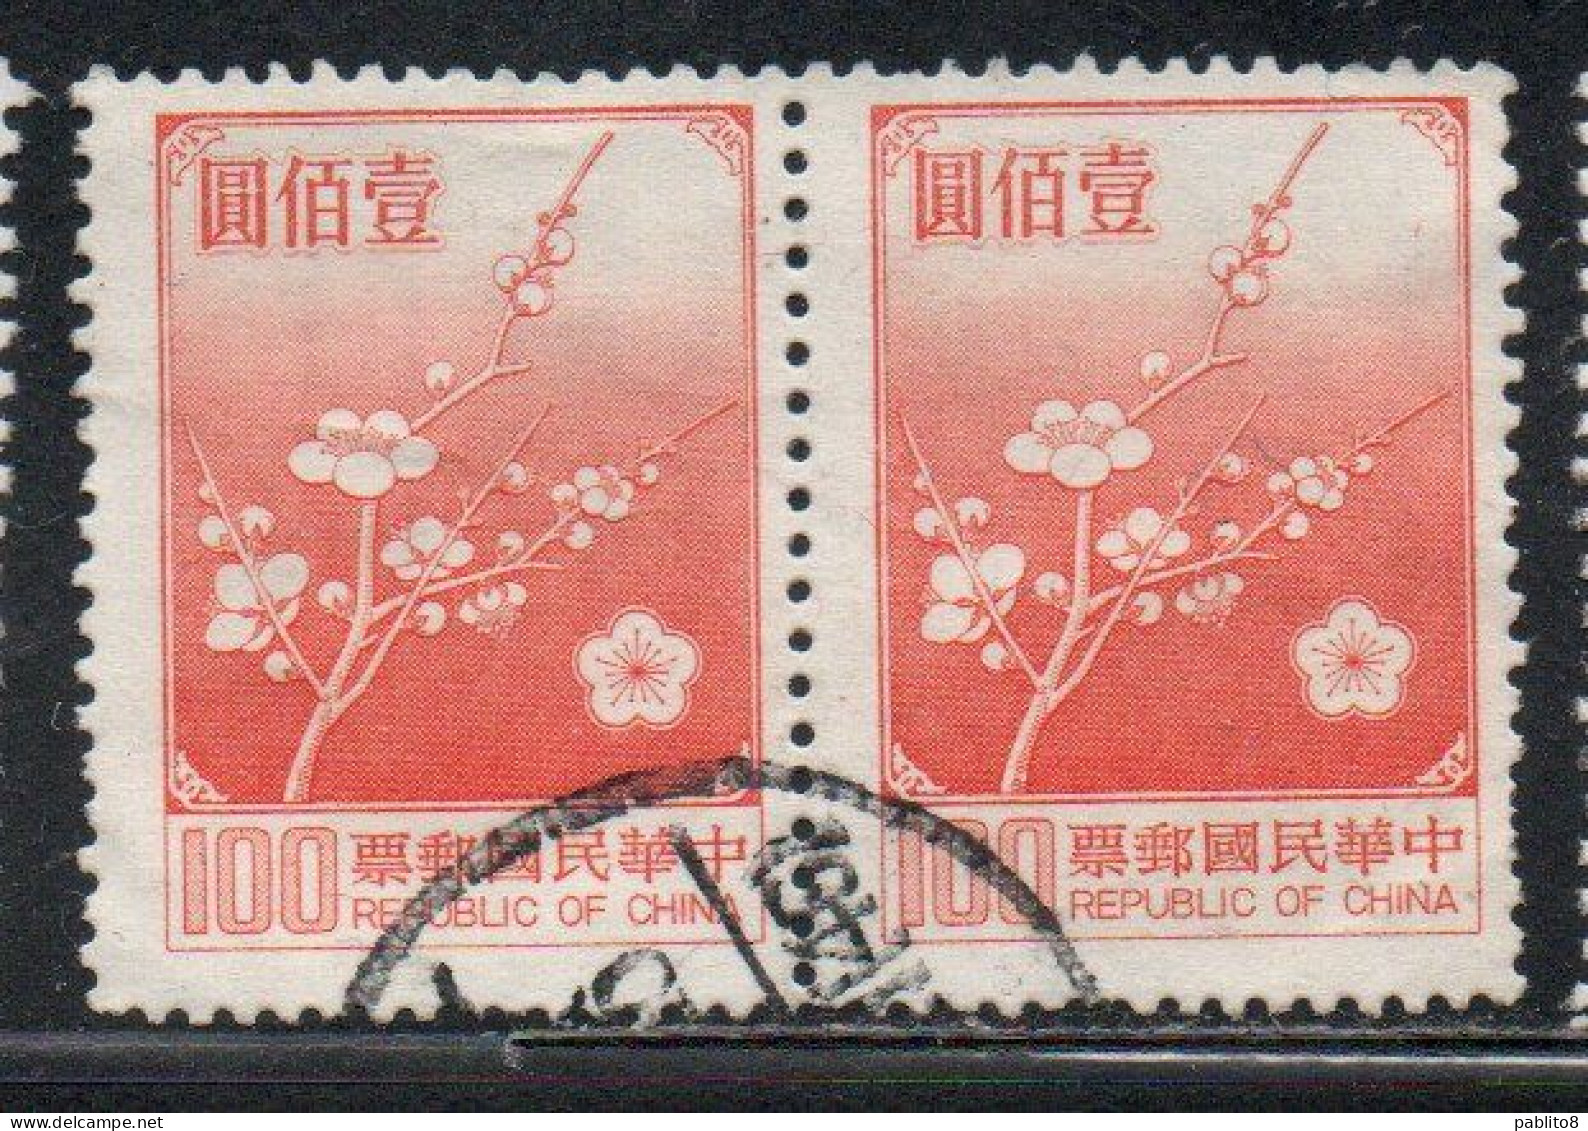 CHINA REPUBLIC CINA TAIWAN FORMOSA 1979 FLORA FLOWERS PLUM BLOSSOMS NATIONAL FLOWER 100$ USED USATO OBLITERE' - Used Stamps